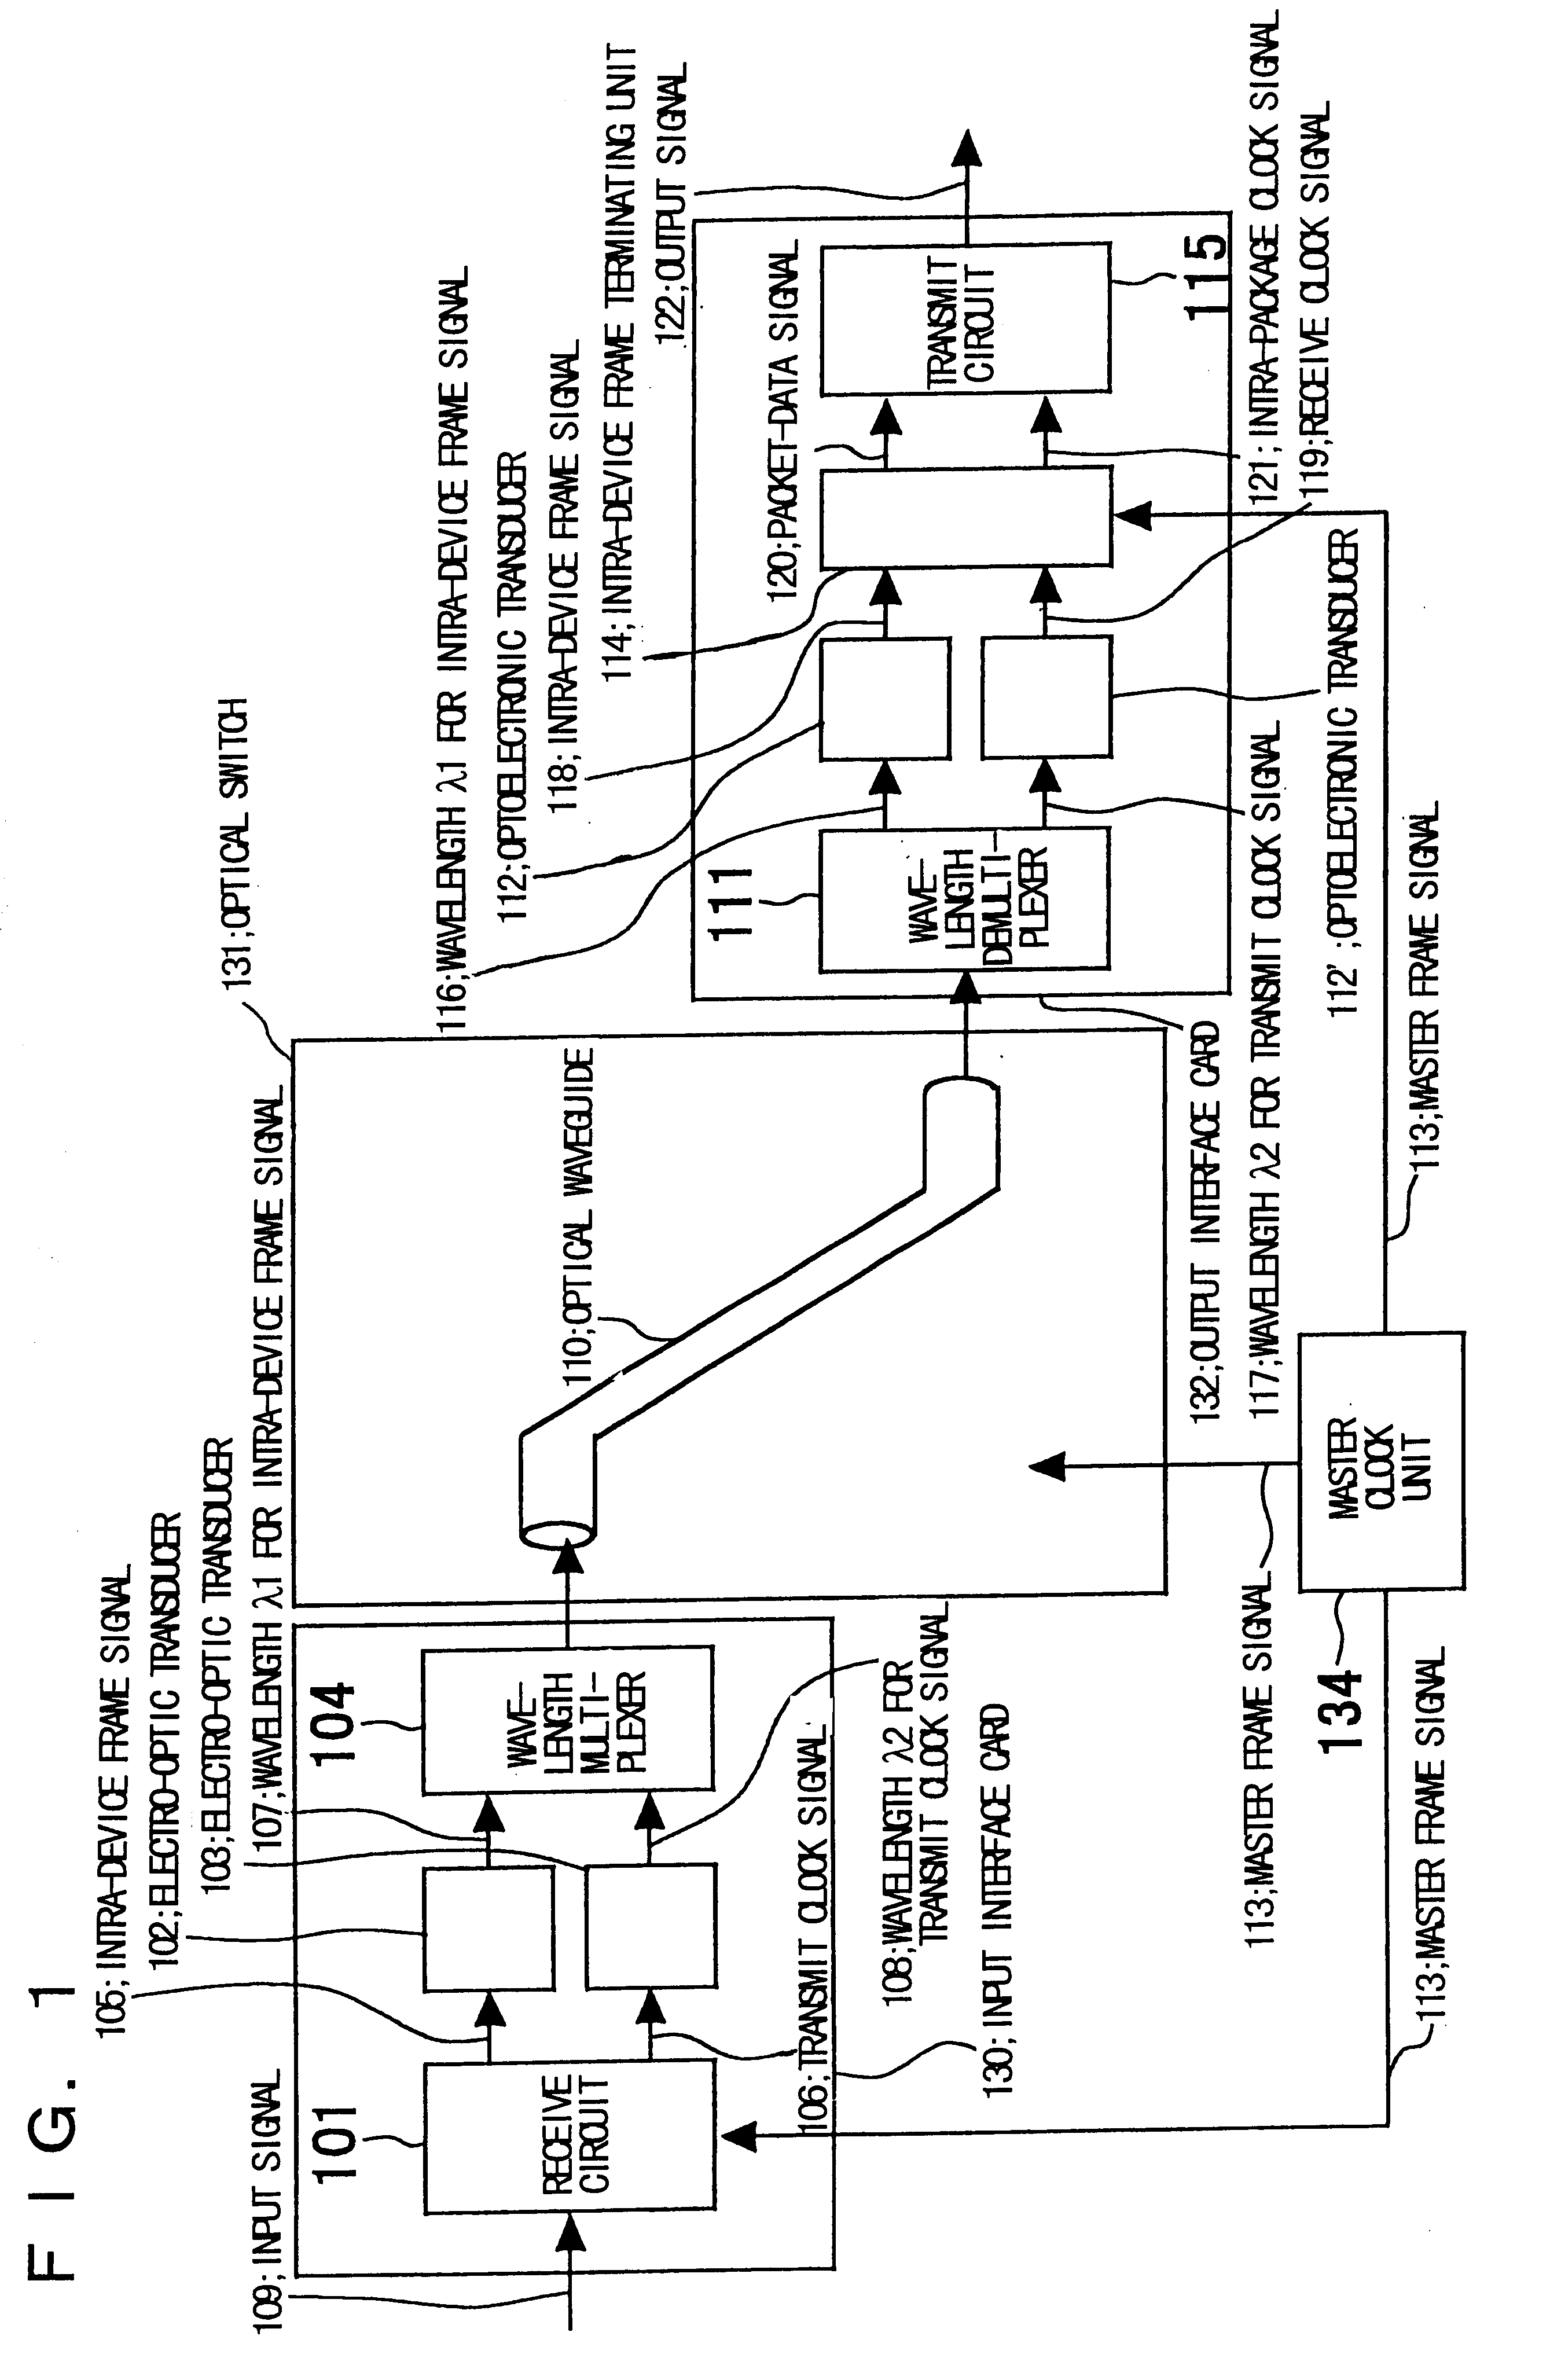 Optical packet switch